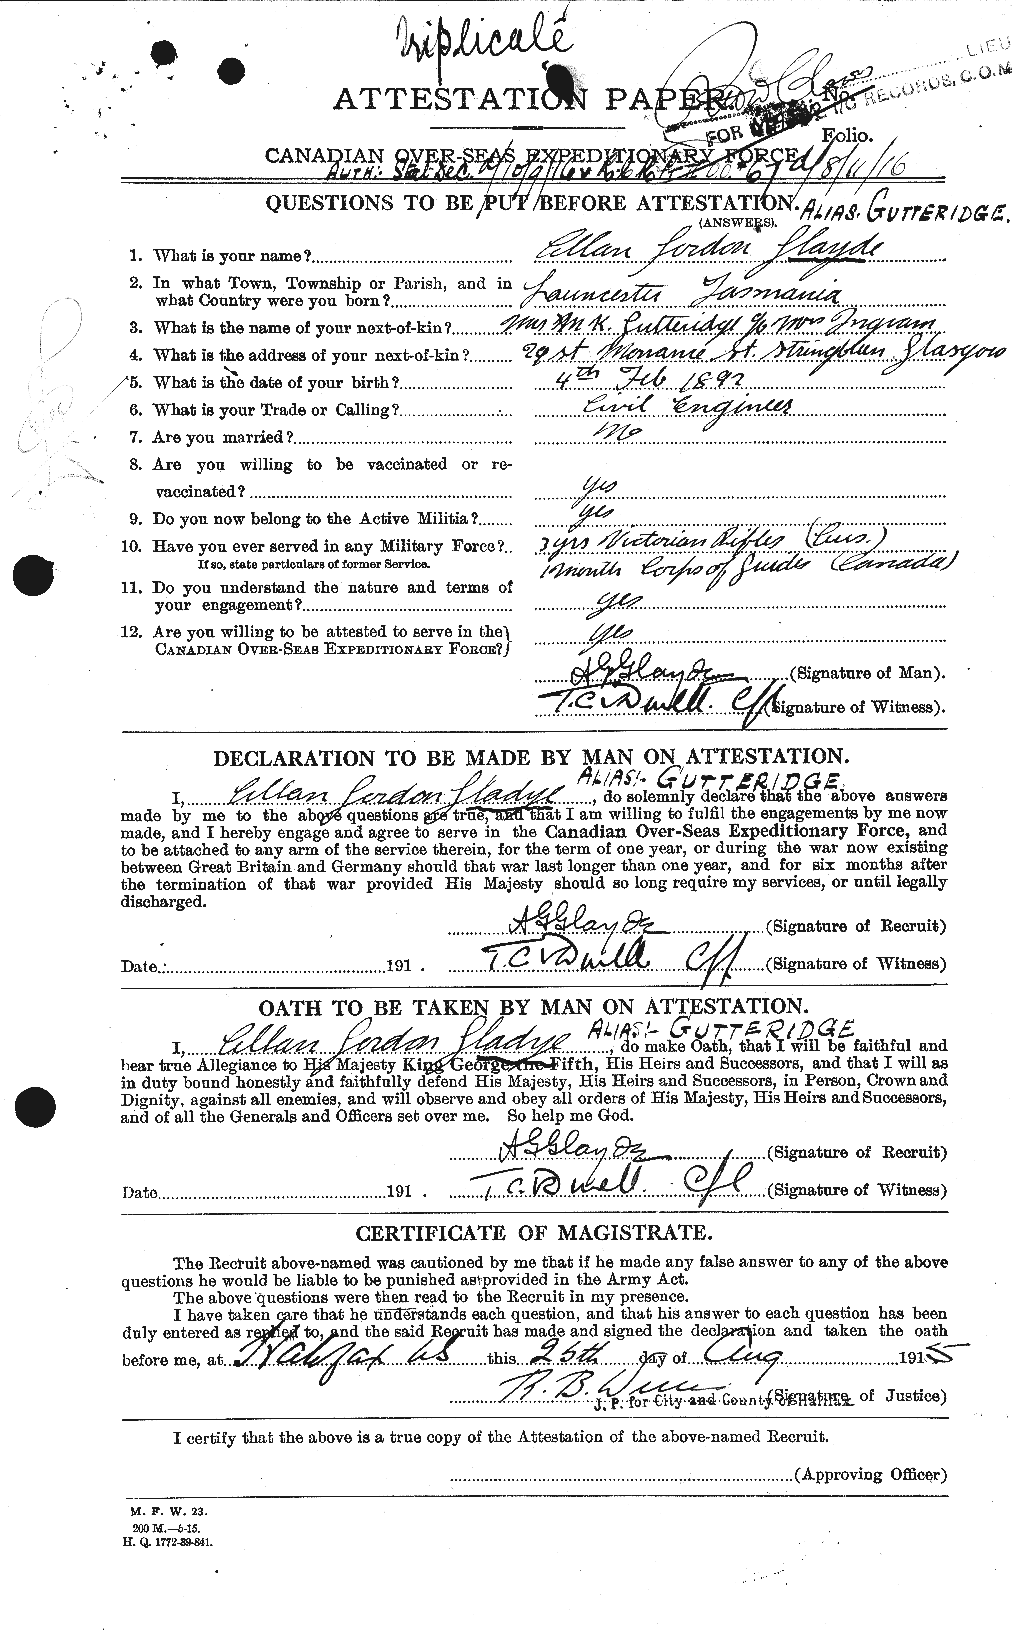 Personnel Records of the First World War - CEF 364753a